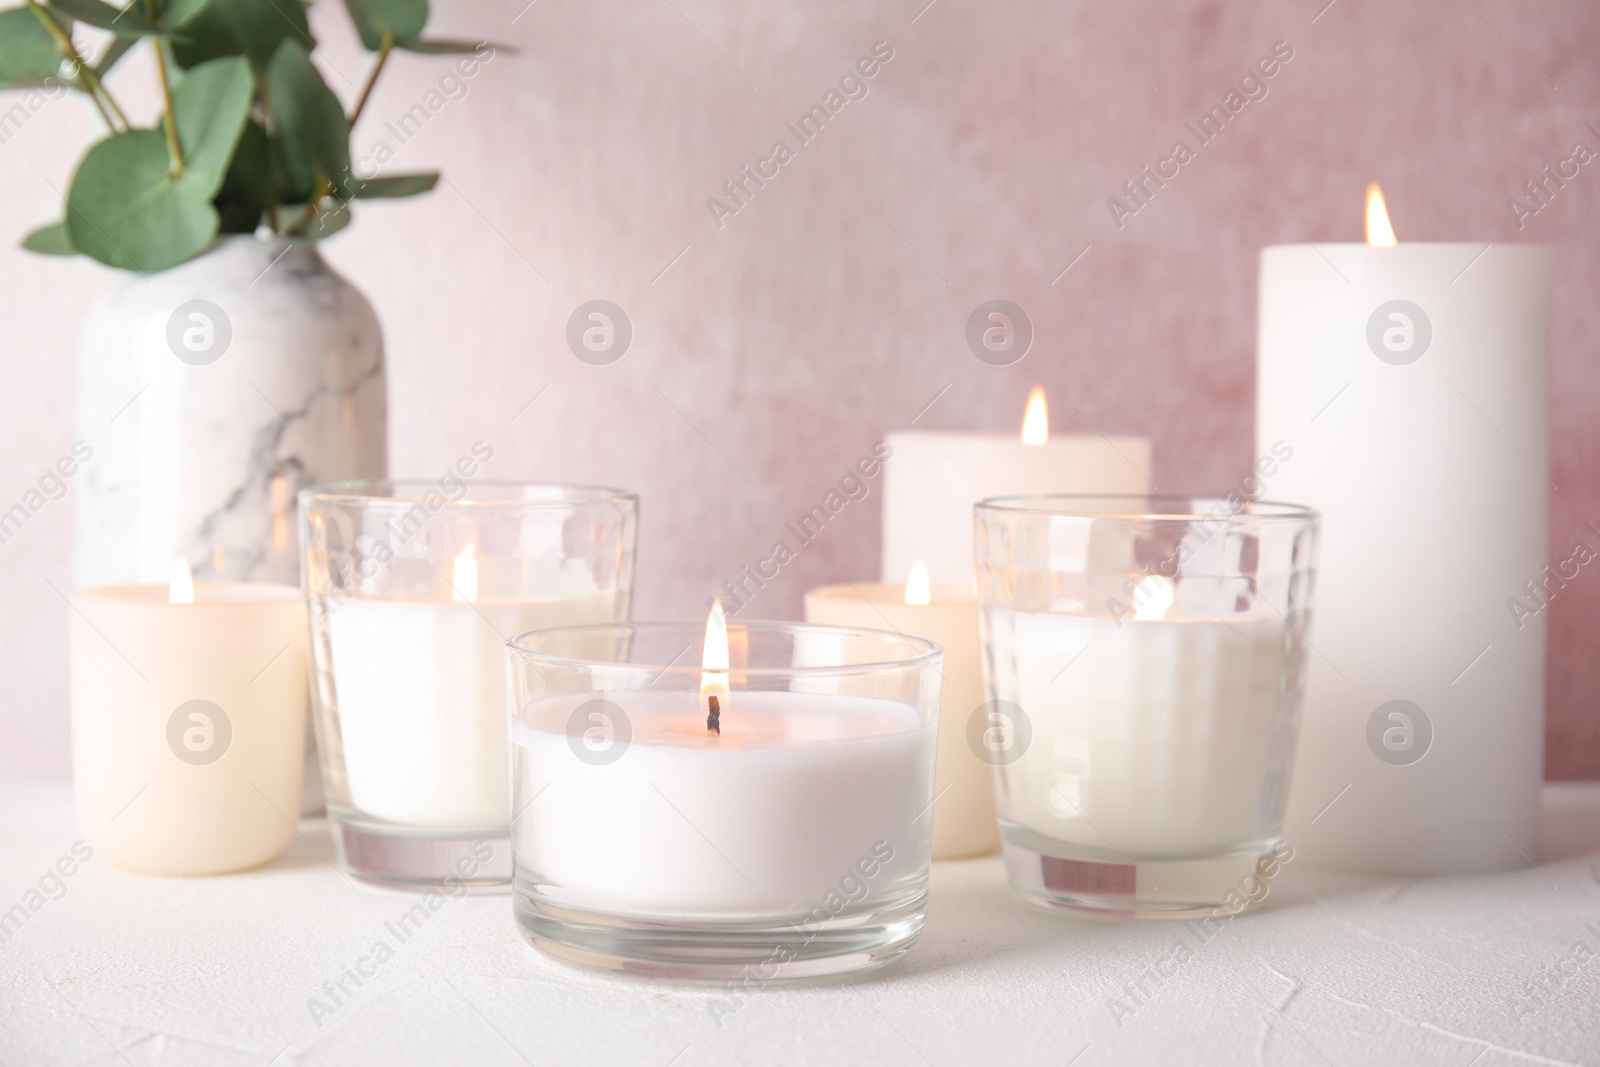 Photo of Burning aromatic candles in holders on table